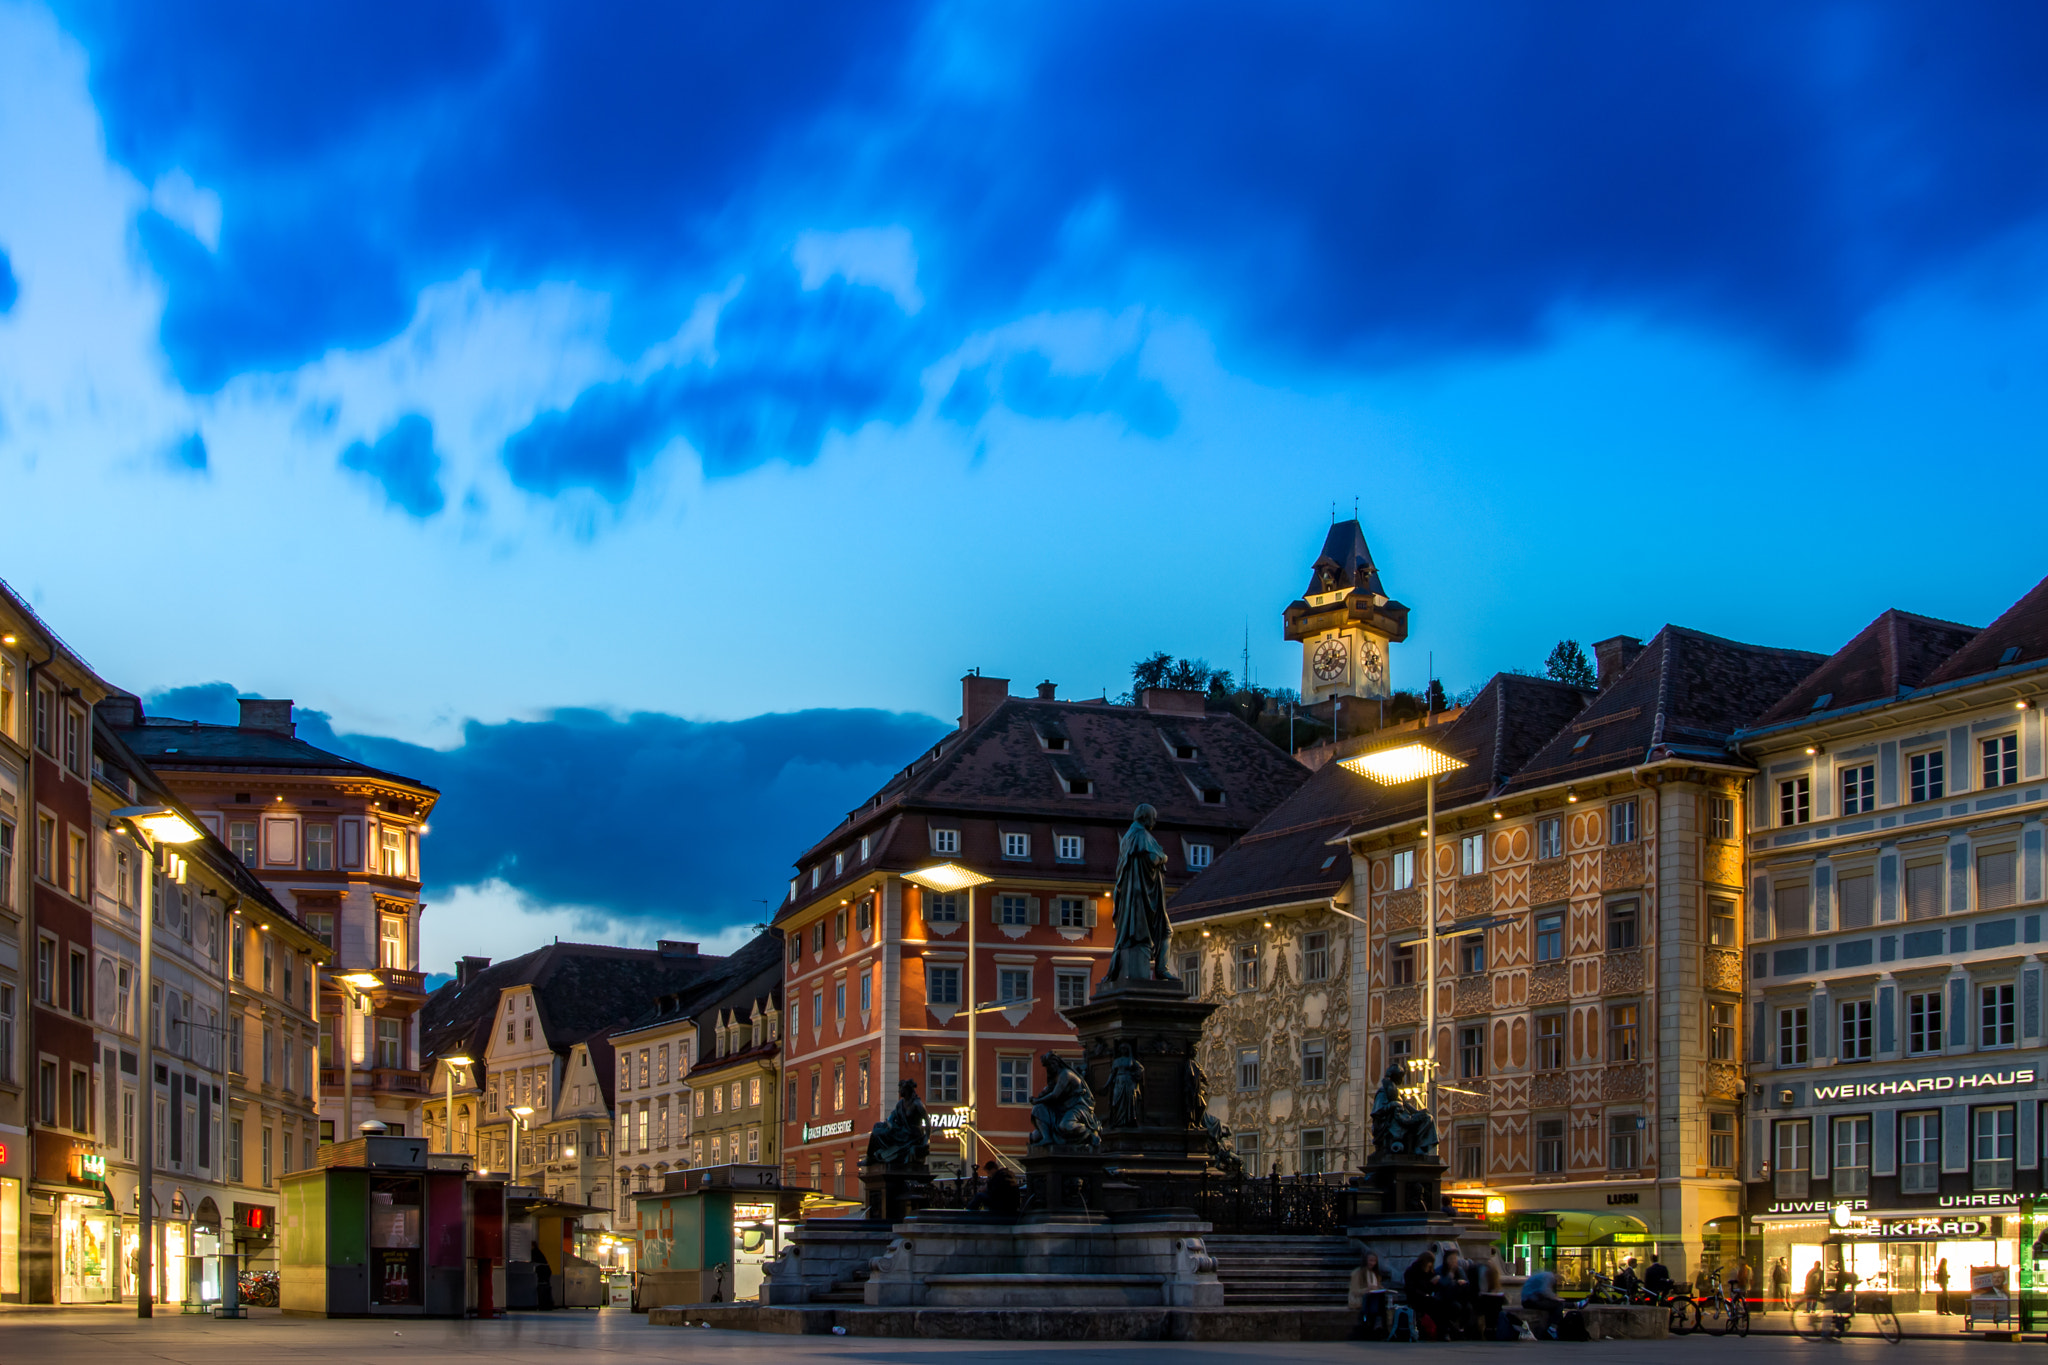 Canon EOS 700D (EOS Rebel T5i / EOS Kiss X7i) + Sigma 24-105mm f/4 DG OS HSM | A sample photo. Bluehour at the mainsquare photography